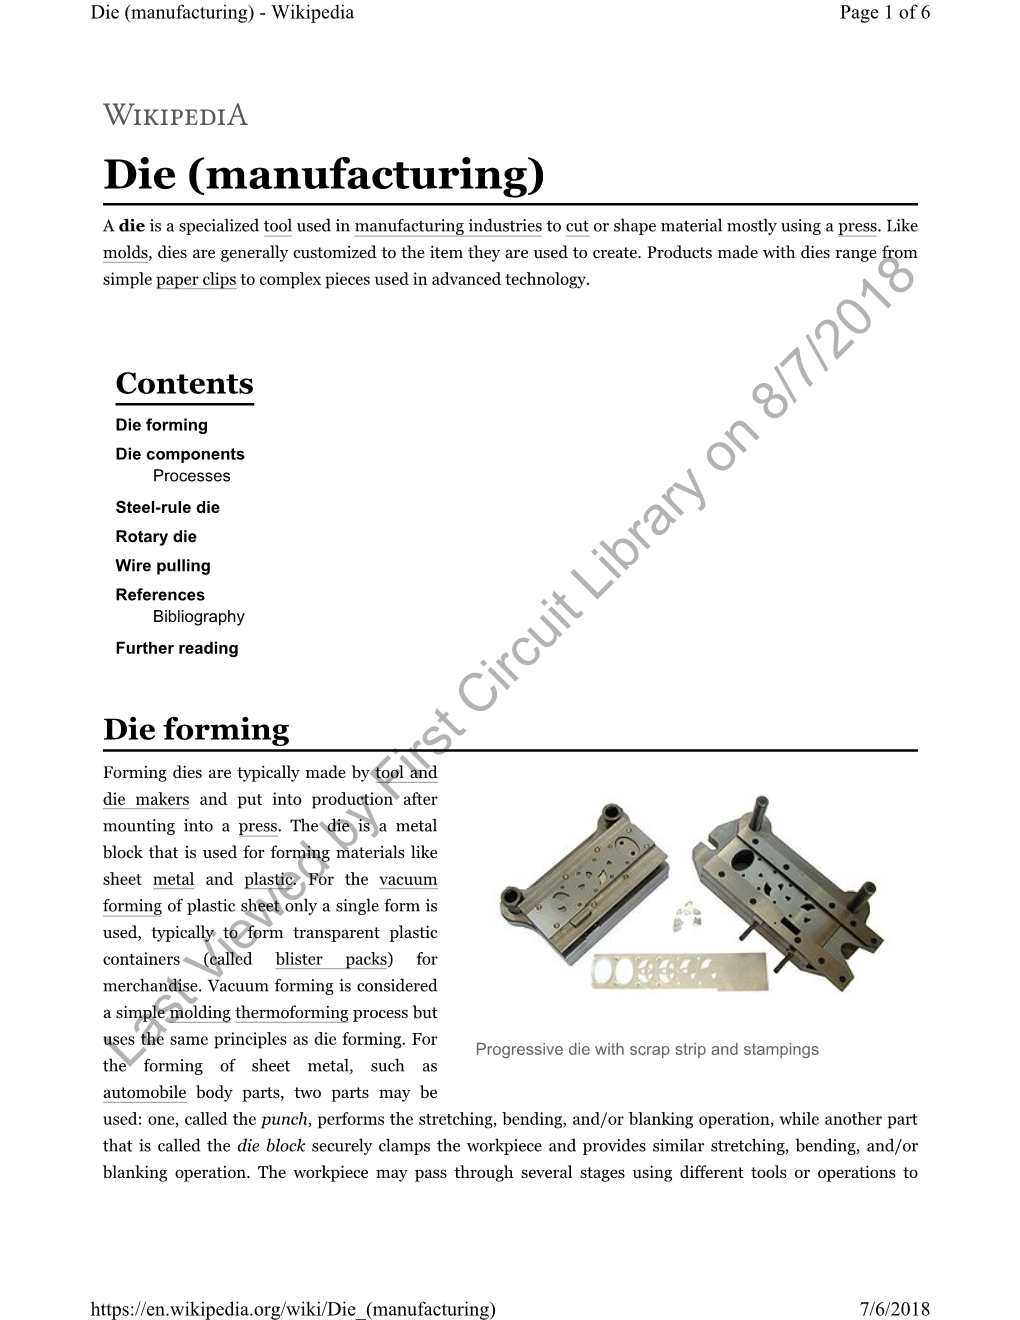 Die (Manufacturing) - Wikipedia Page 1 of 6